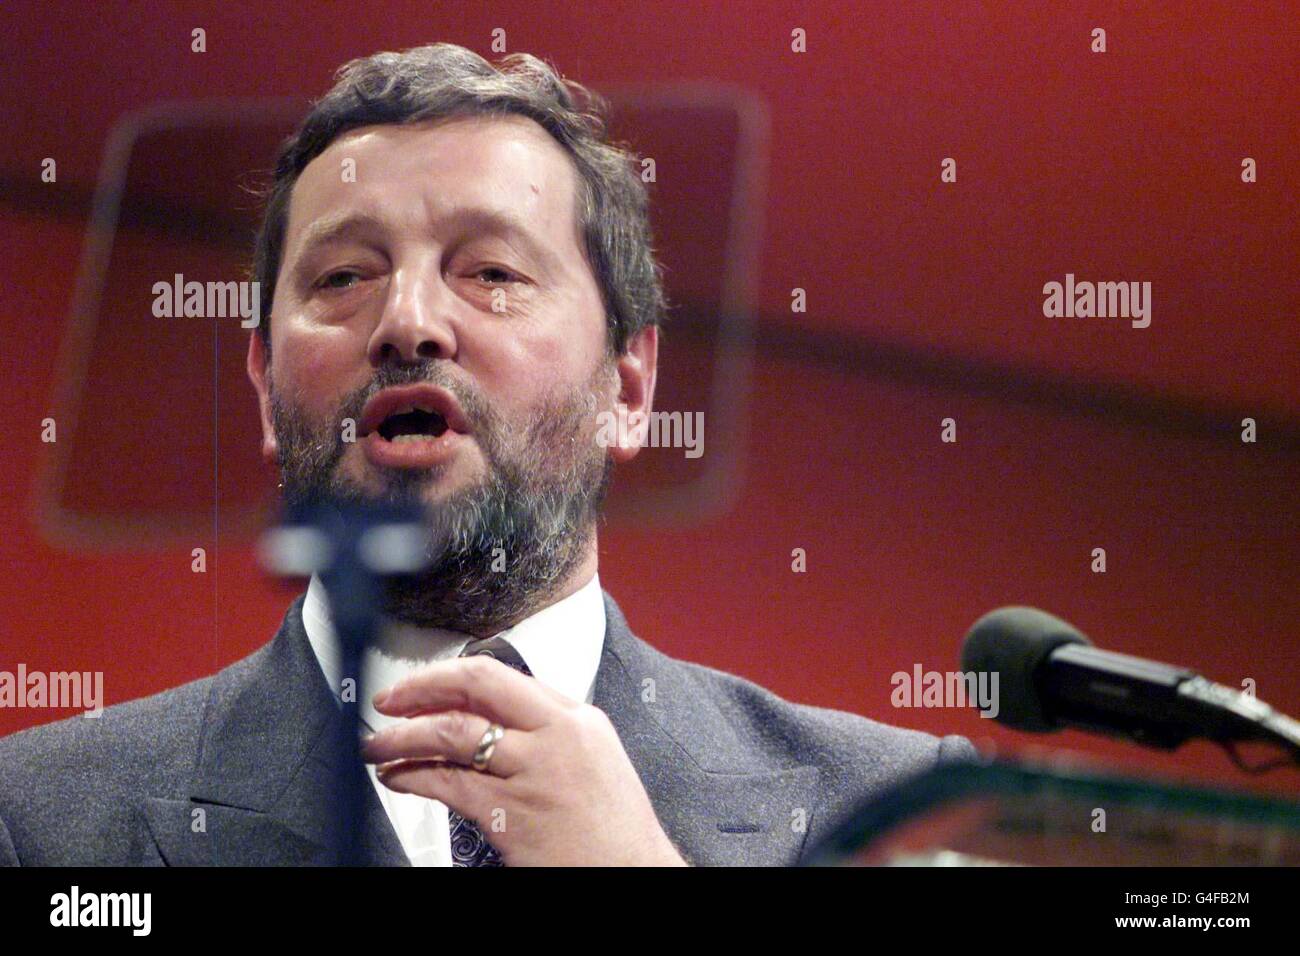 Education Secretary David Blunkett speaks at the Labour Party Conference in Blackpool today (Thursday). PHOTO OWEN HUMPHREYS/PA. Stock Photo